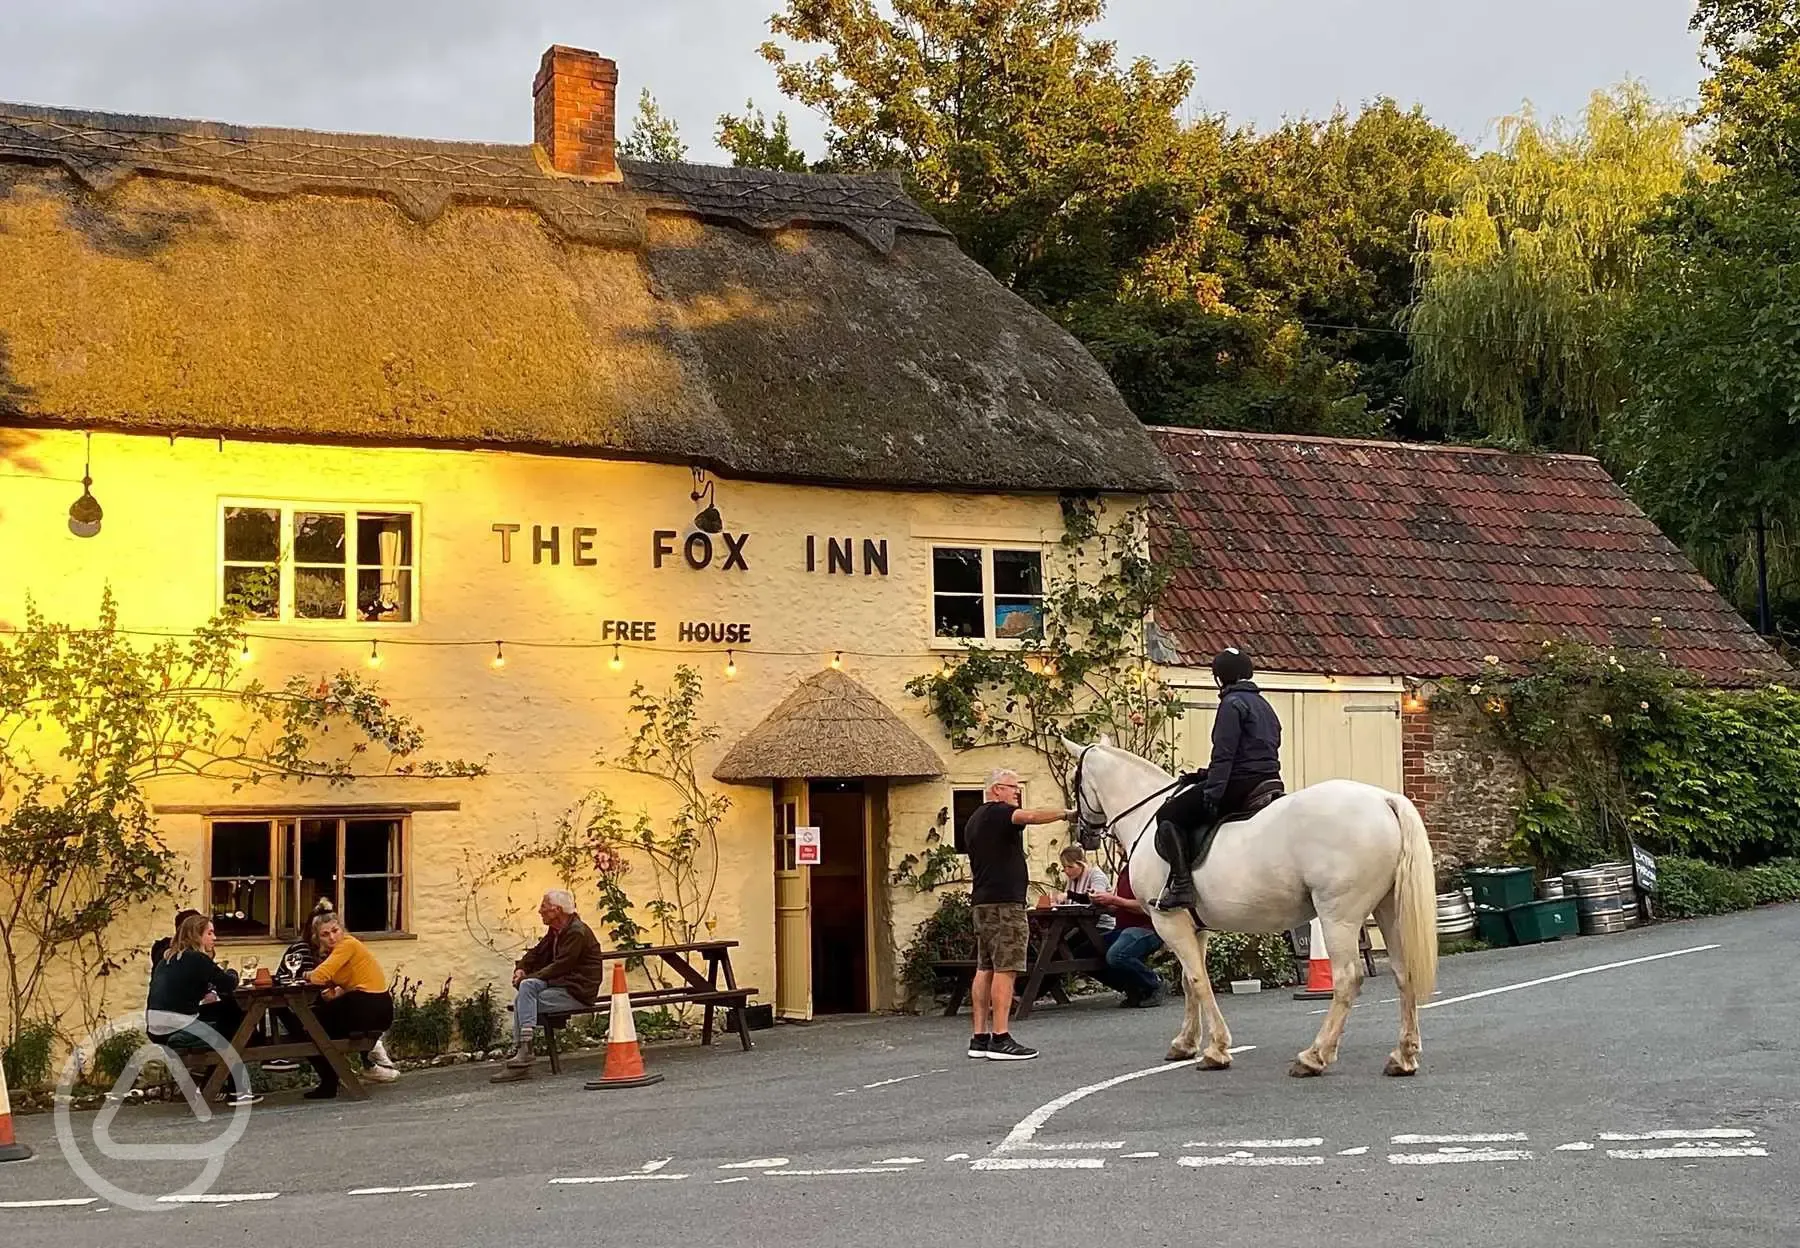 The pub in nearby corscombe